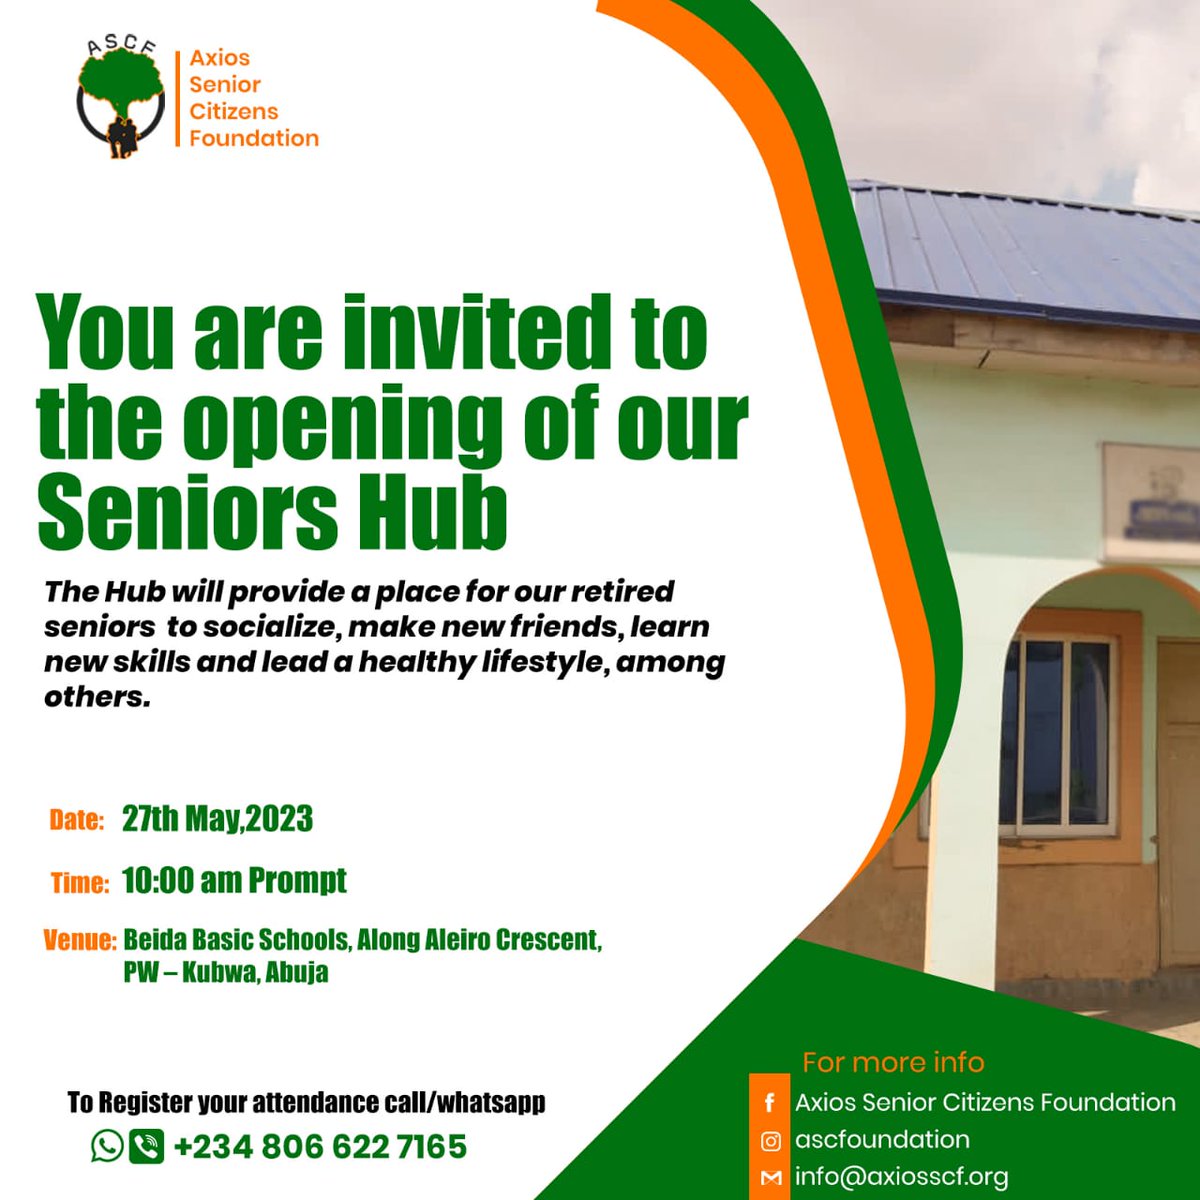 You are all invited to the opening of our Seniors Hub on 27th May 2023. @FMHDSD @nsccofficial @Fmohnigeria @FmardNg @ActionAidNG @NigeriaFMYS @LeadwayPensure @PoliceNG